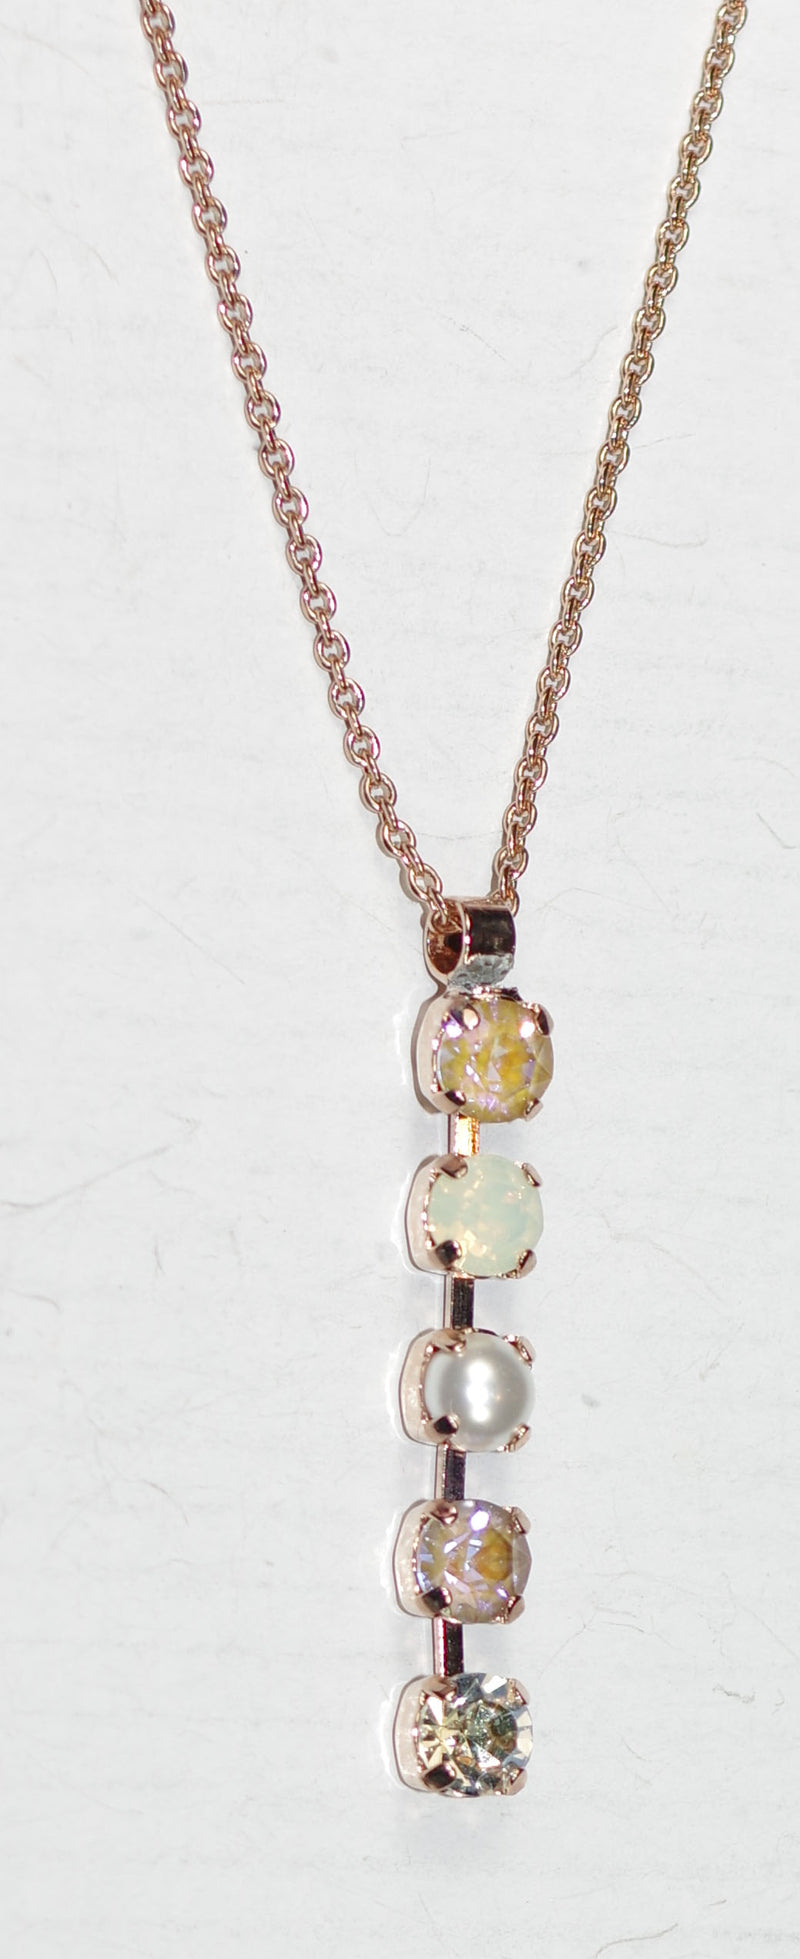 MARIANA PENDANT BUTTER PECAN: white, pink, pearl, clear, amber stones in 2" rose gold setting, 19" adjustable chain